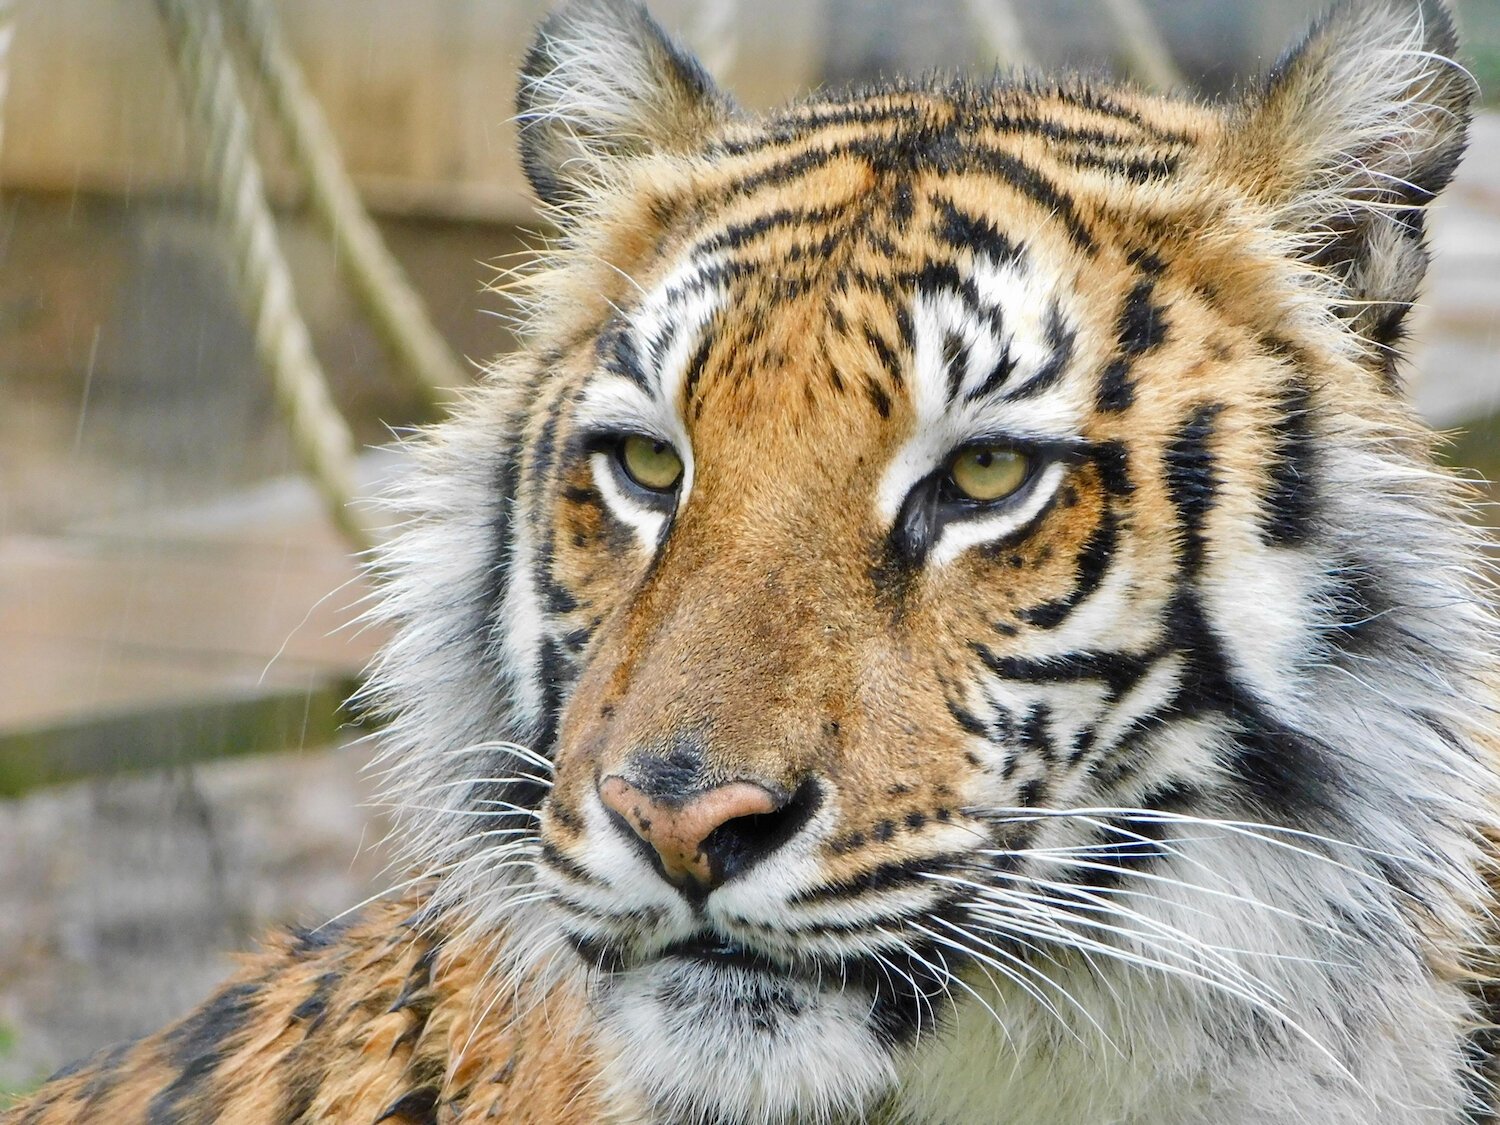 Black Pine Animal Sanctuary in Albion is home to seven rescued tigers.